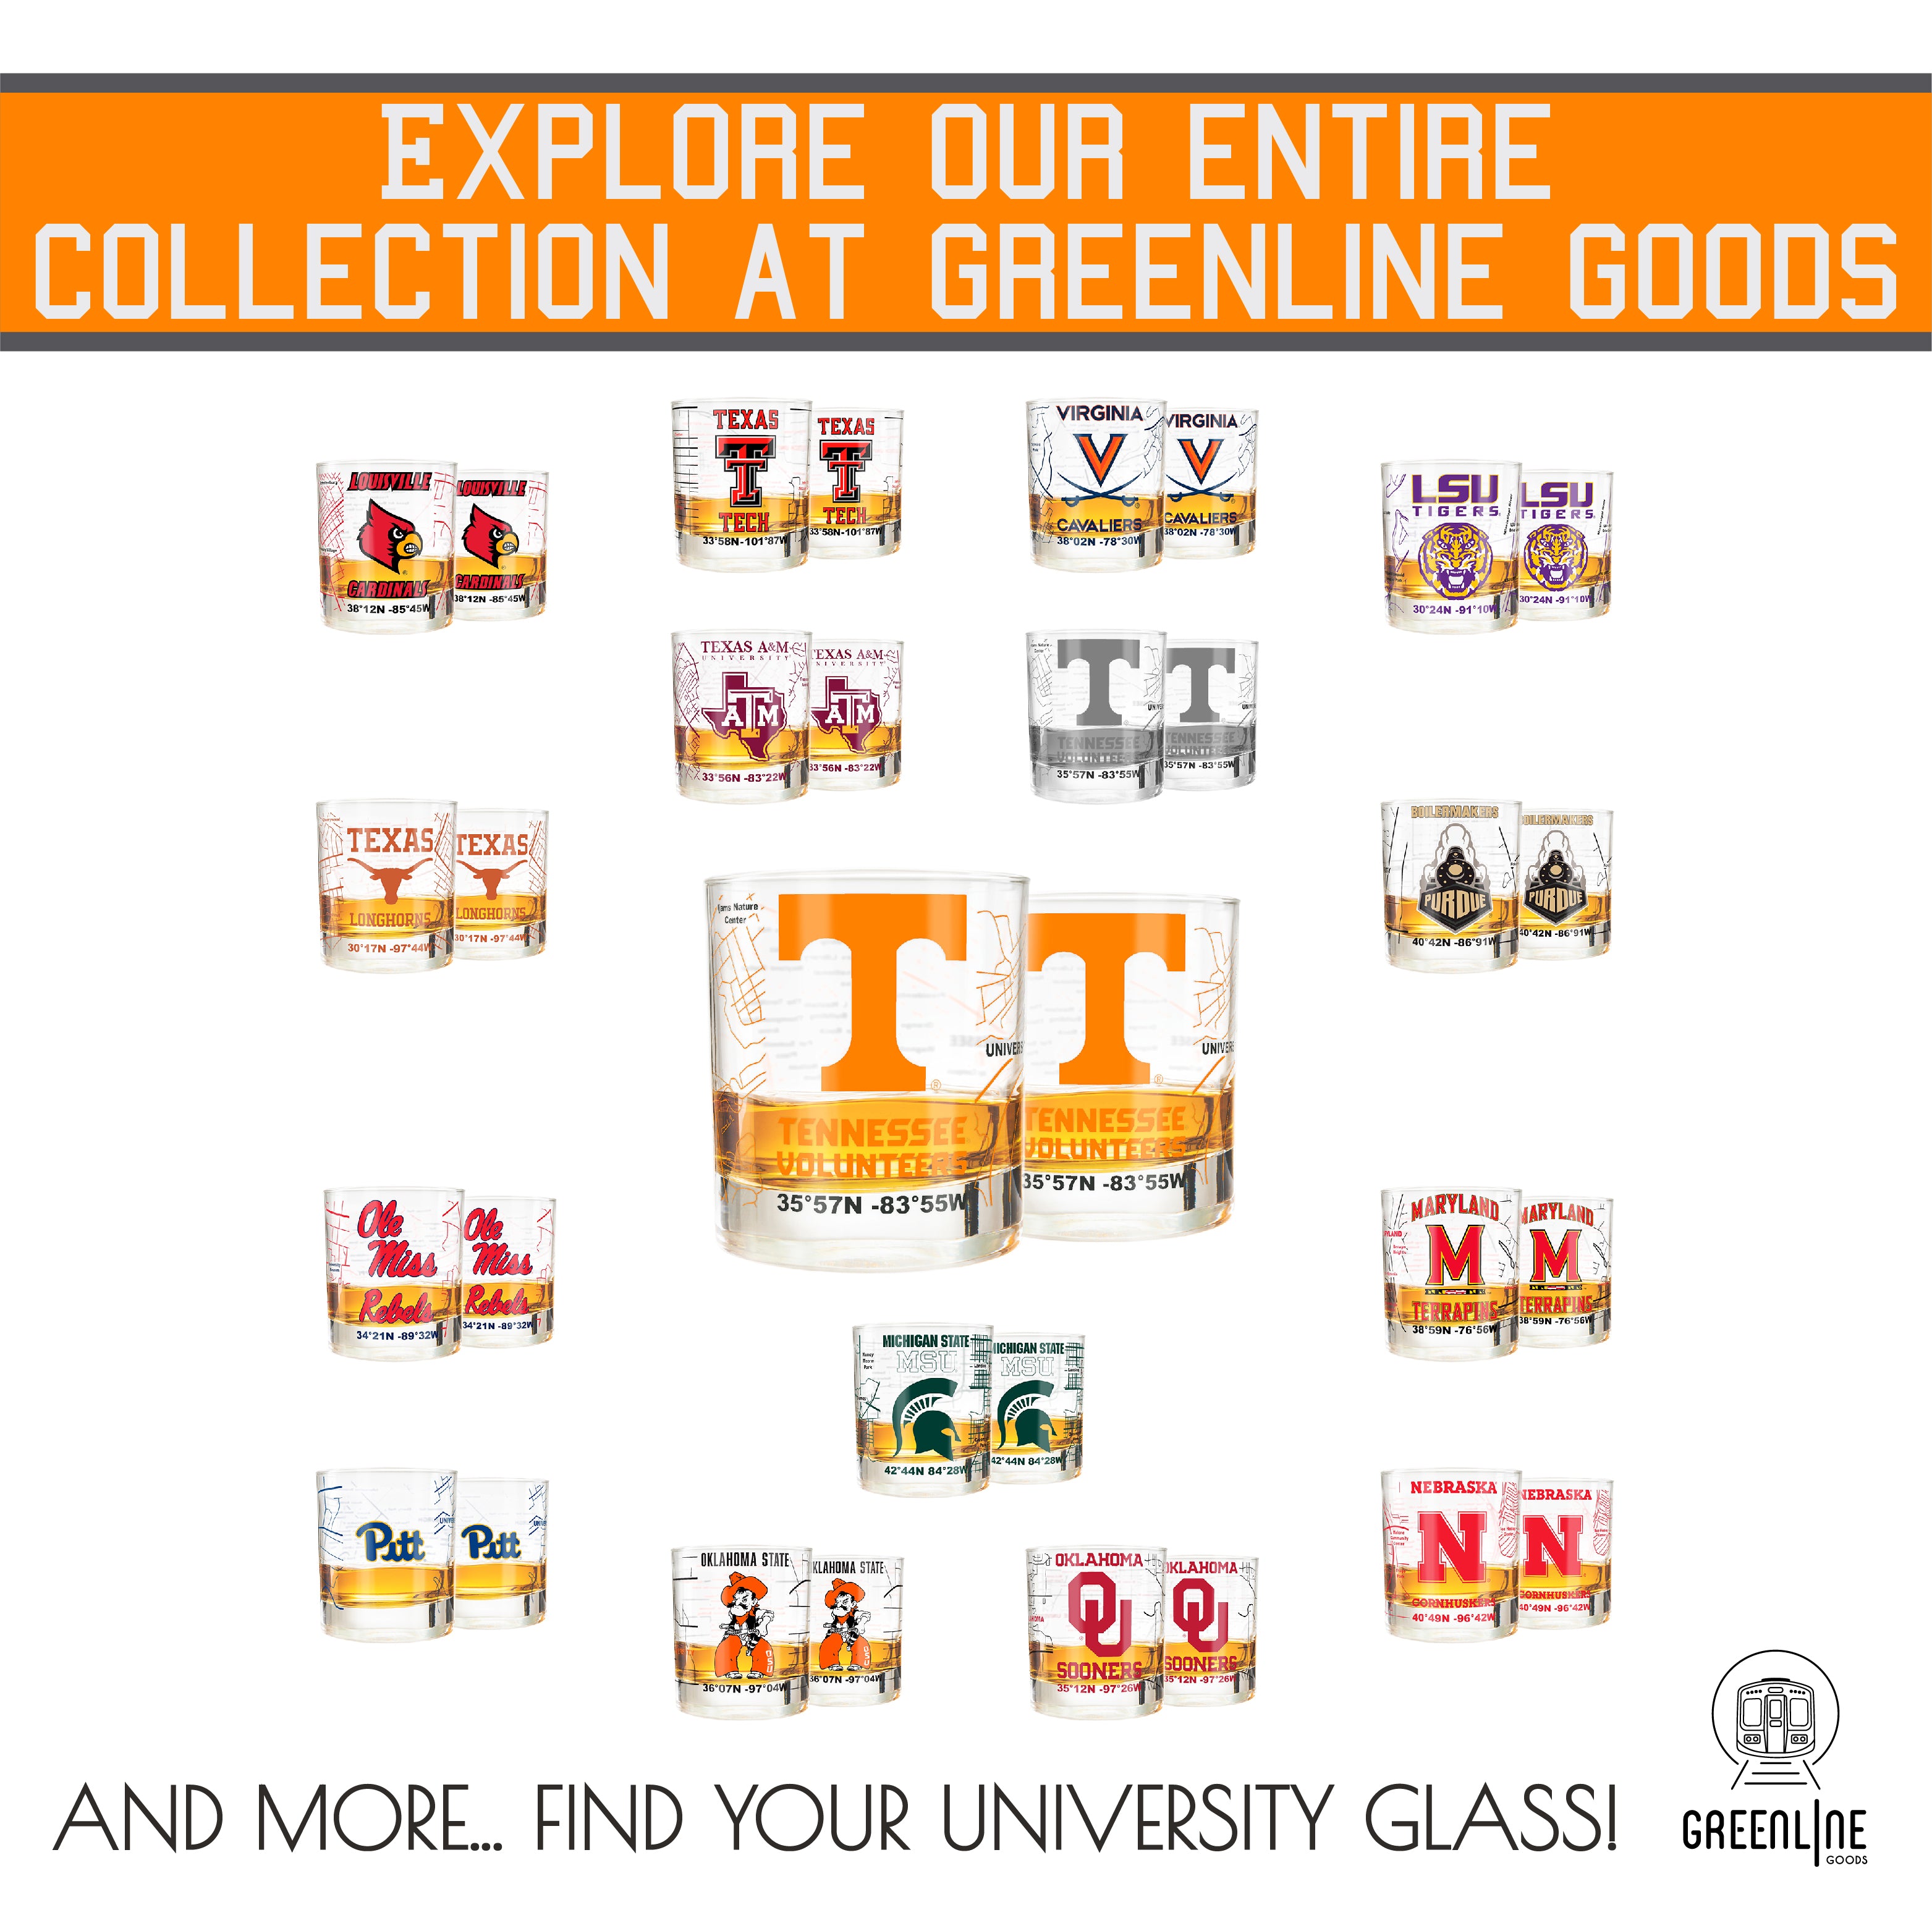 Insulated Clear Whiskey Glass Set - Turbo Theme Tennessee